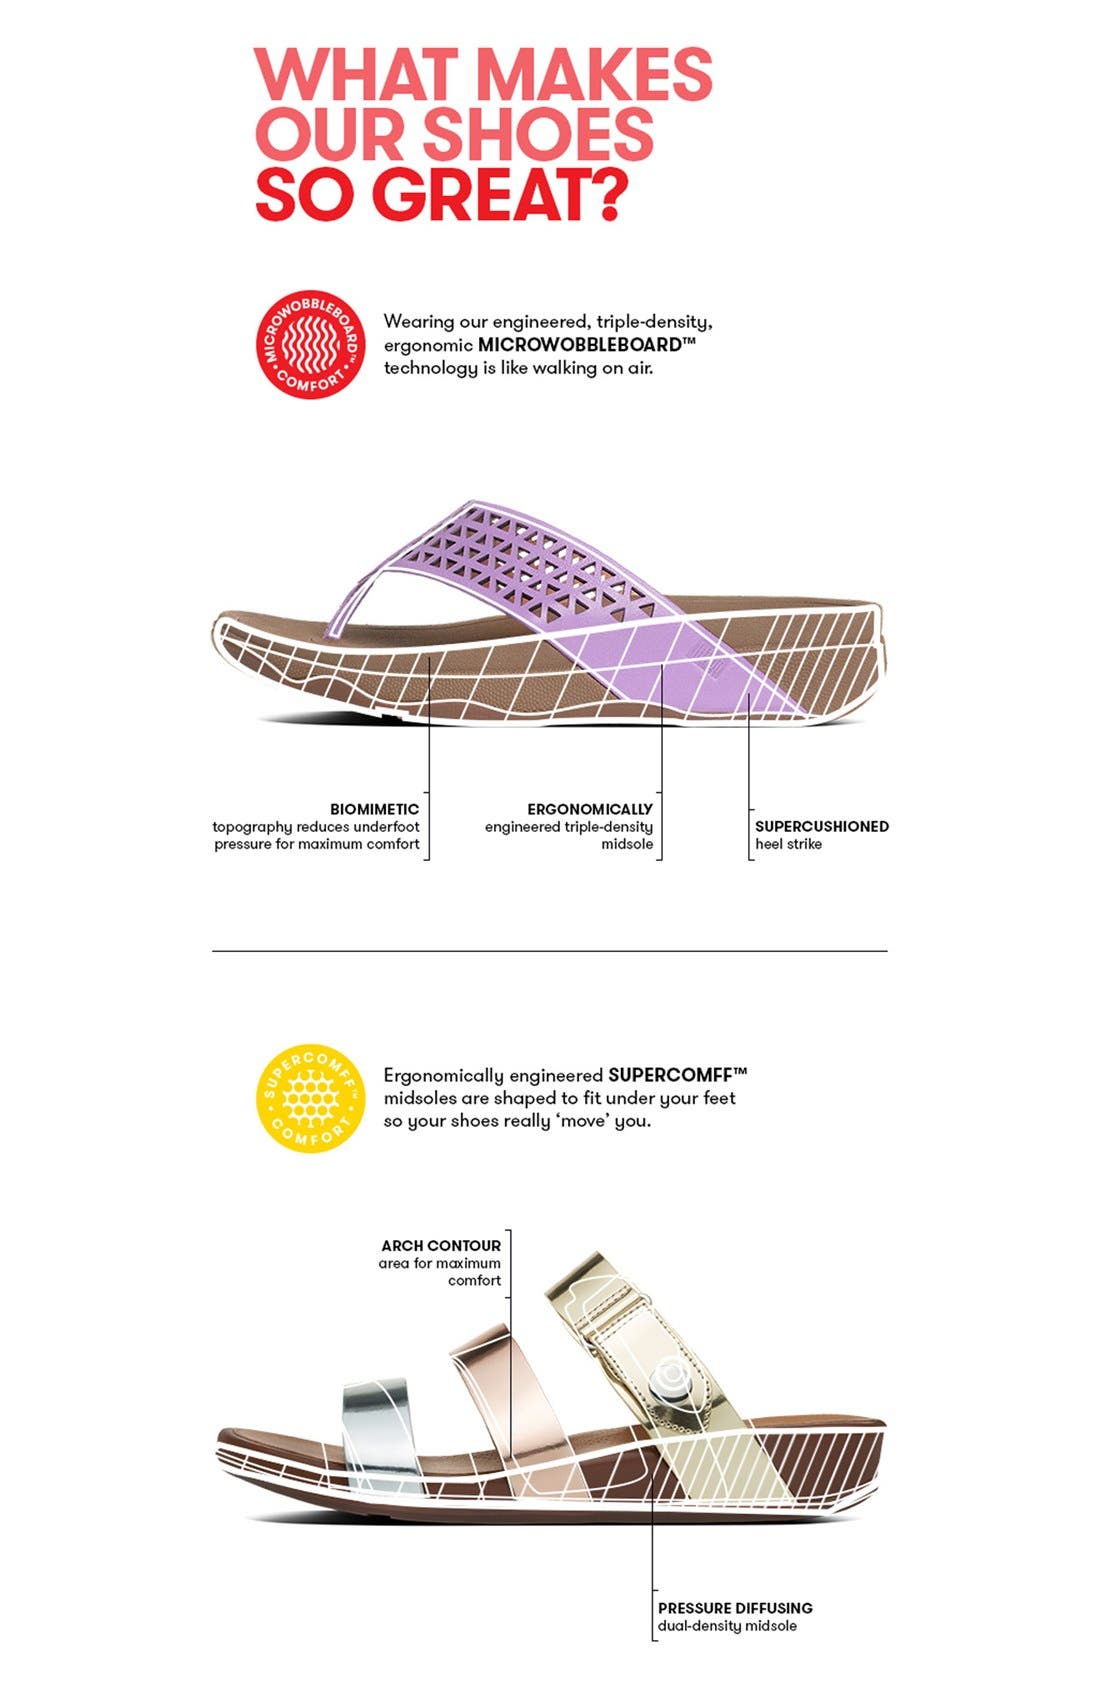 fitflop technology